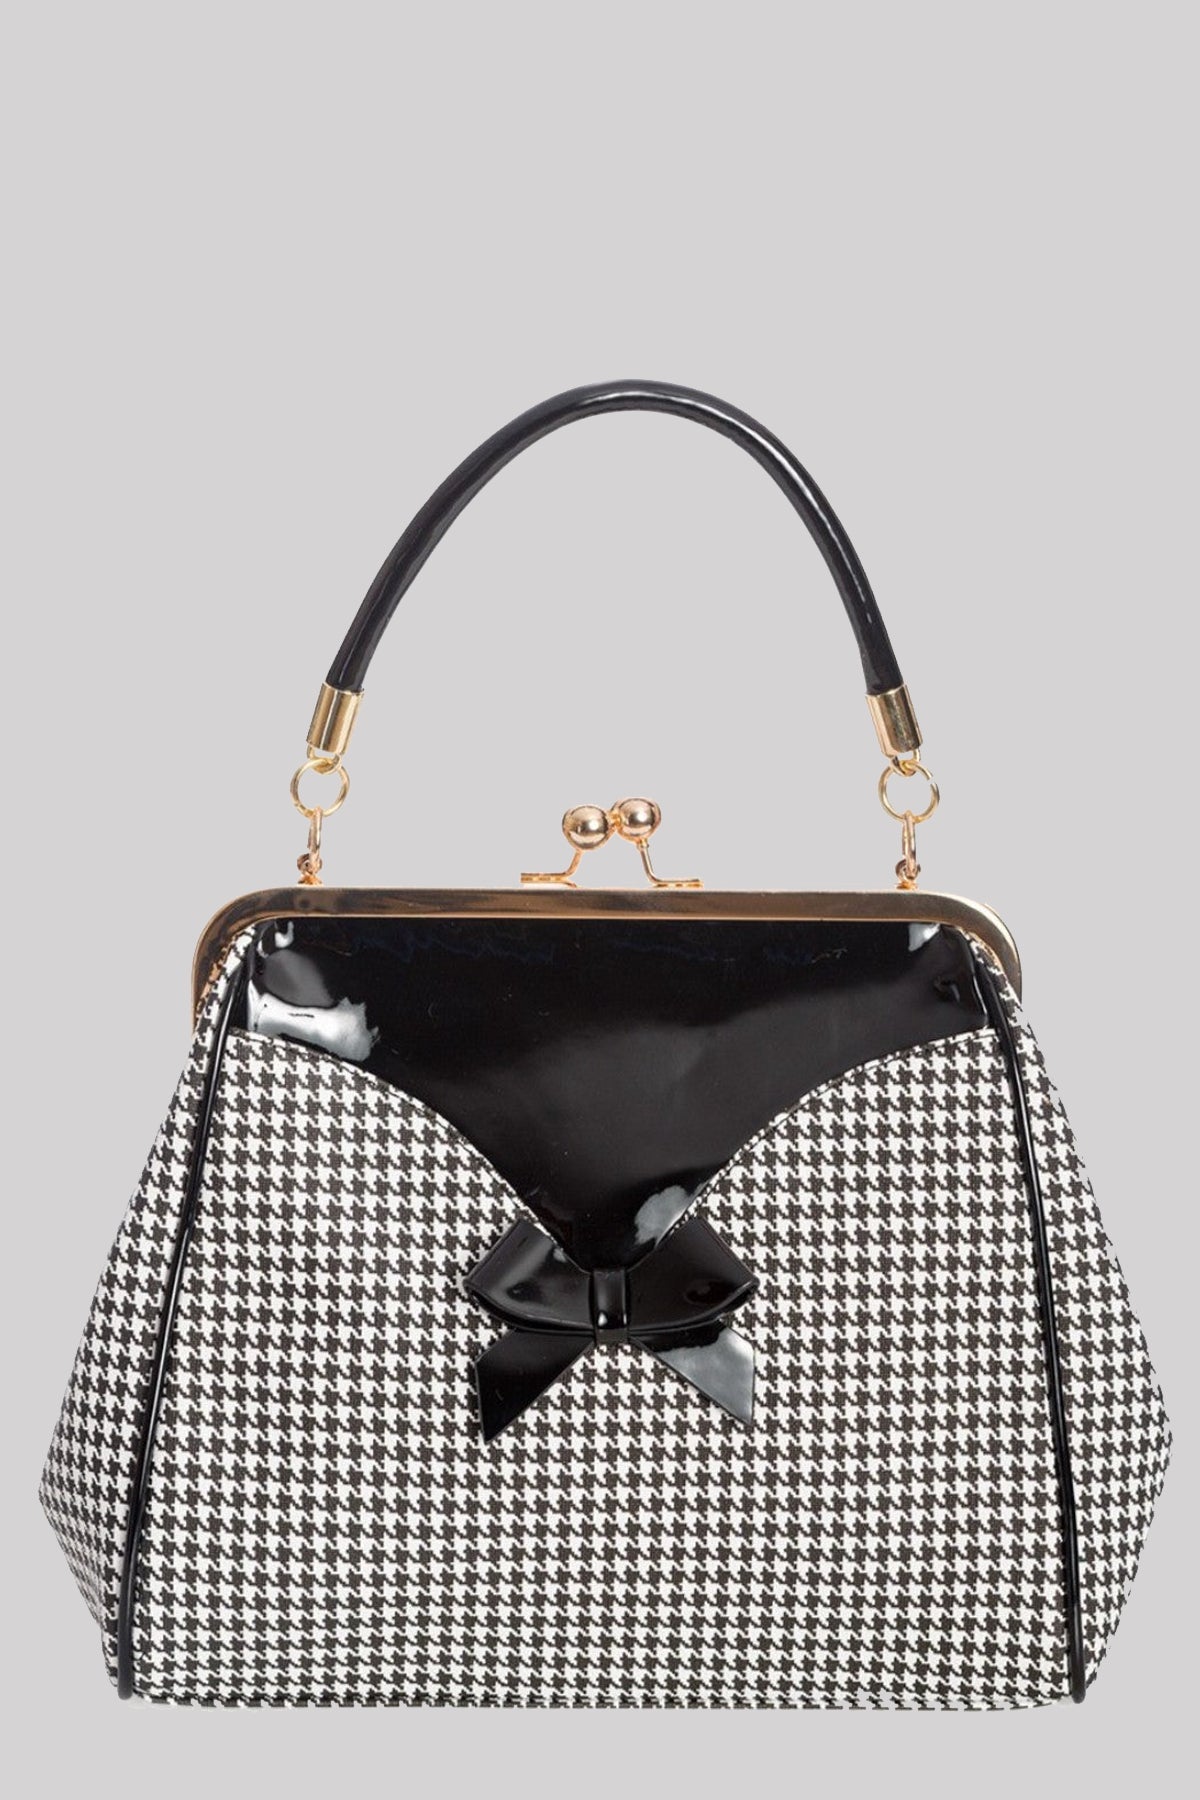 Banned Marilyn 1950s Handbag Retro Frame Bag With Small Bow, Houndstooth